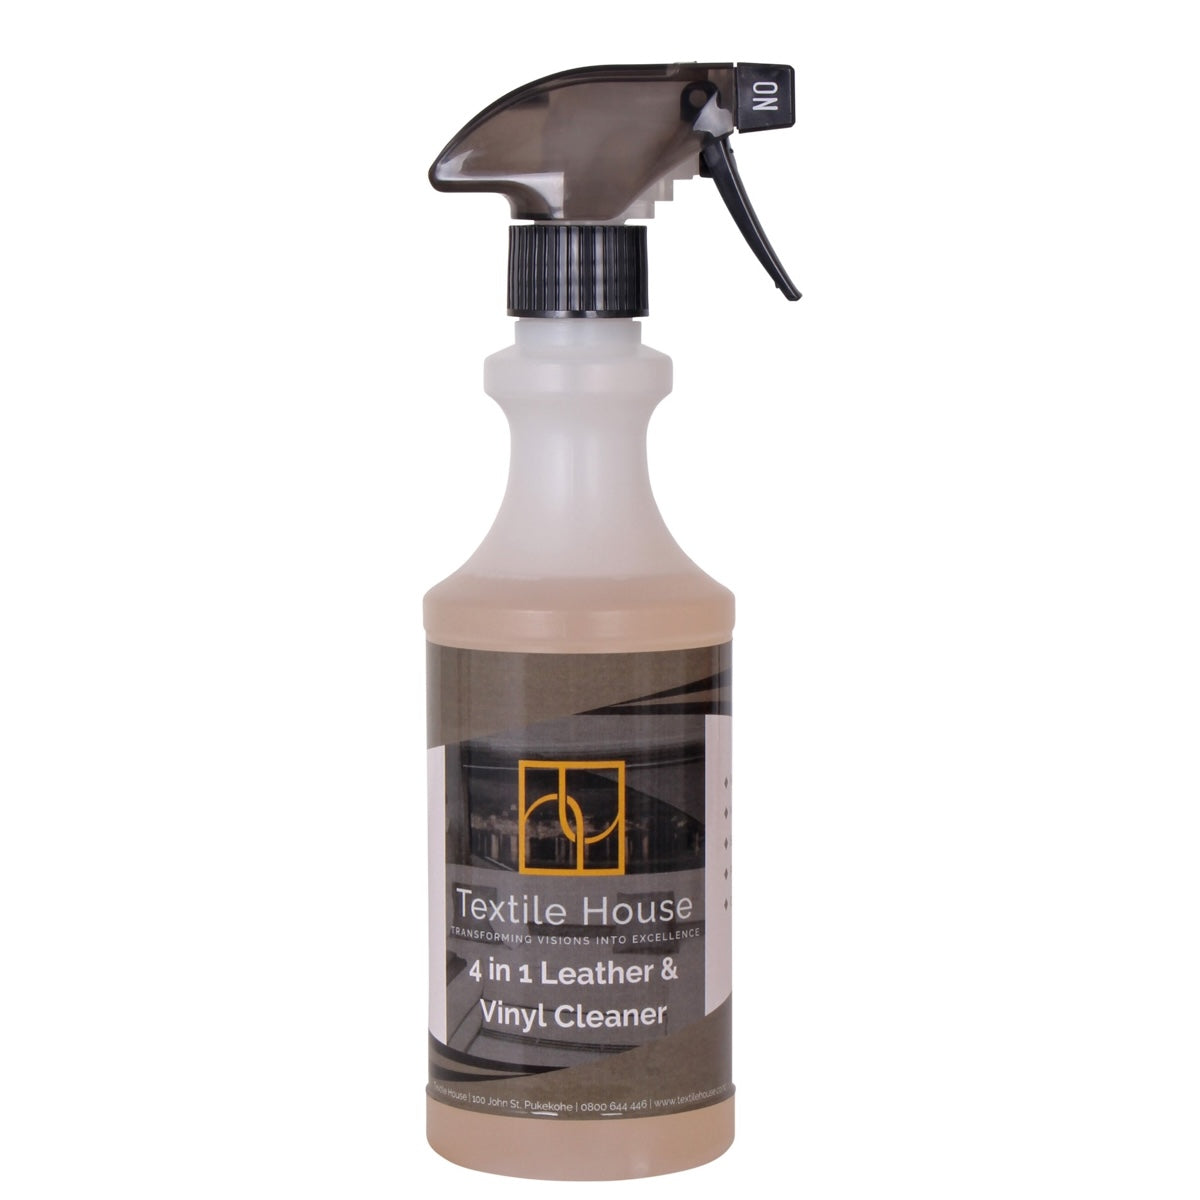 TEXTILE HOUSE 4 in 1 Furniture Cleaner